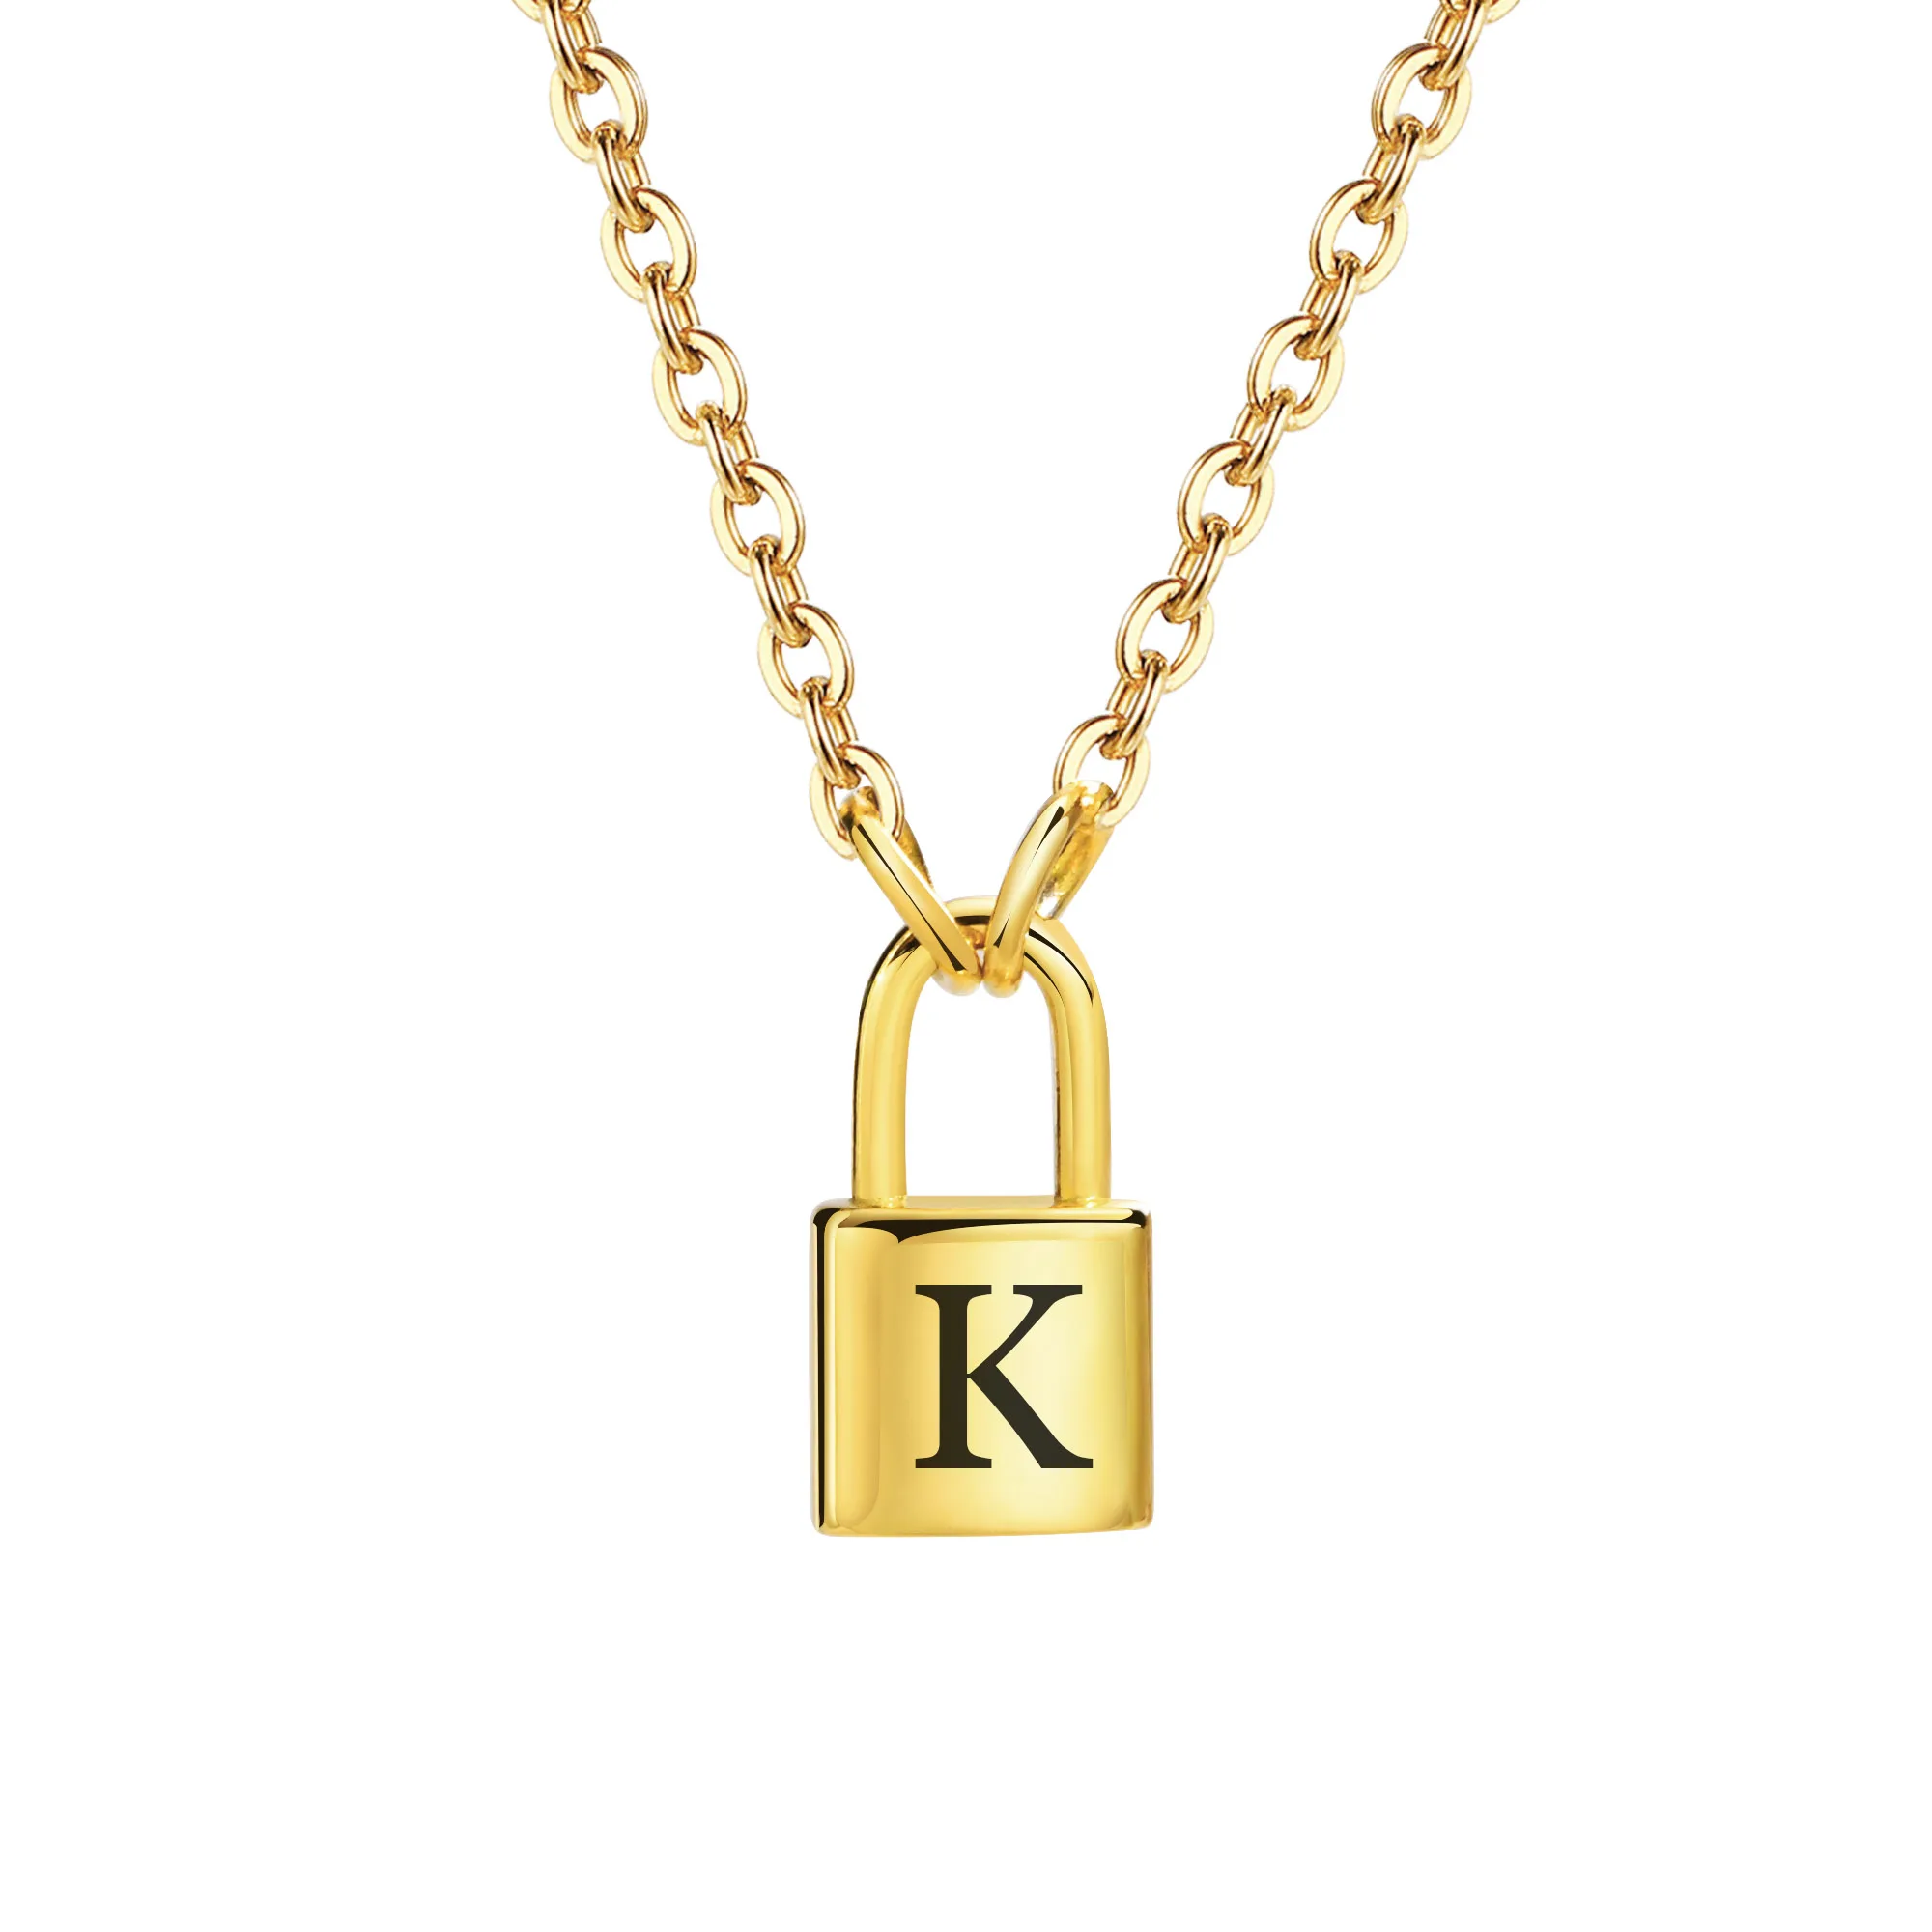 

Charm Statement Necklace Jewelry Women 18k Gold Plated Trendy Initial Letter Dainty Lock Stainless Steel Chain Necklace